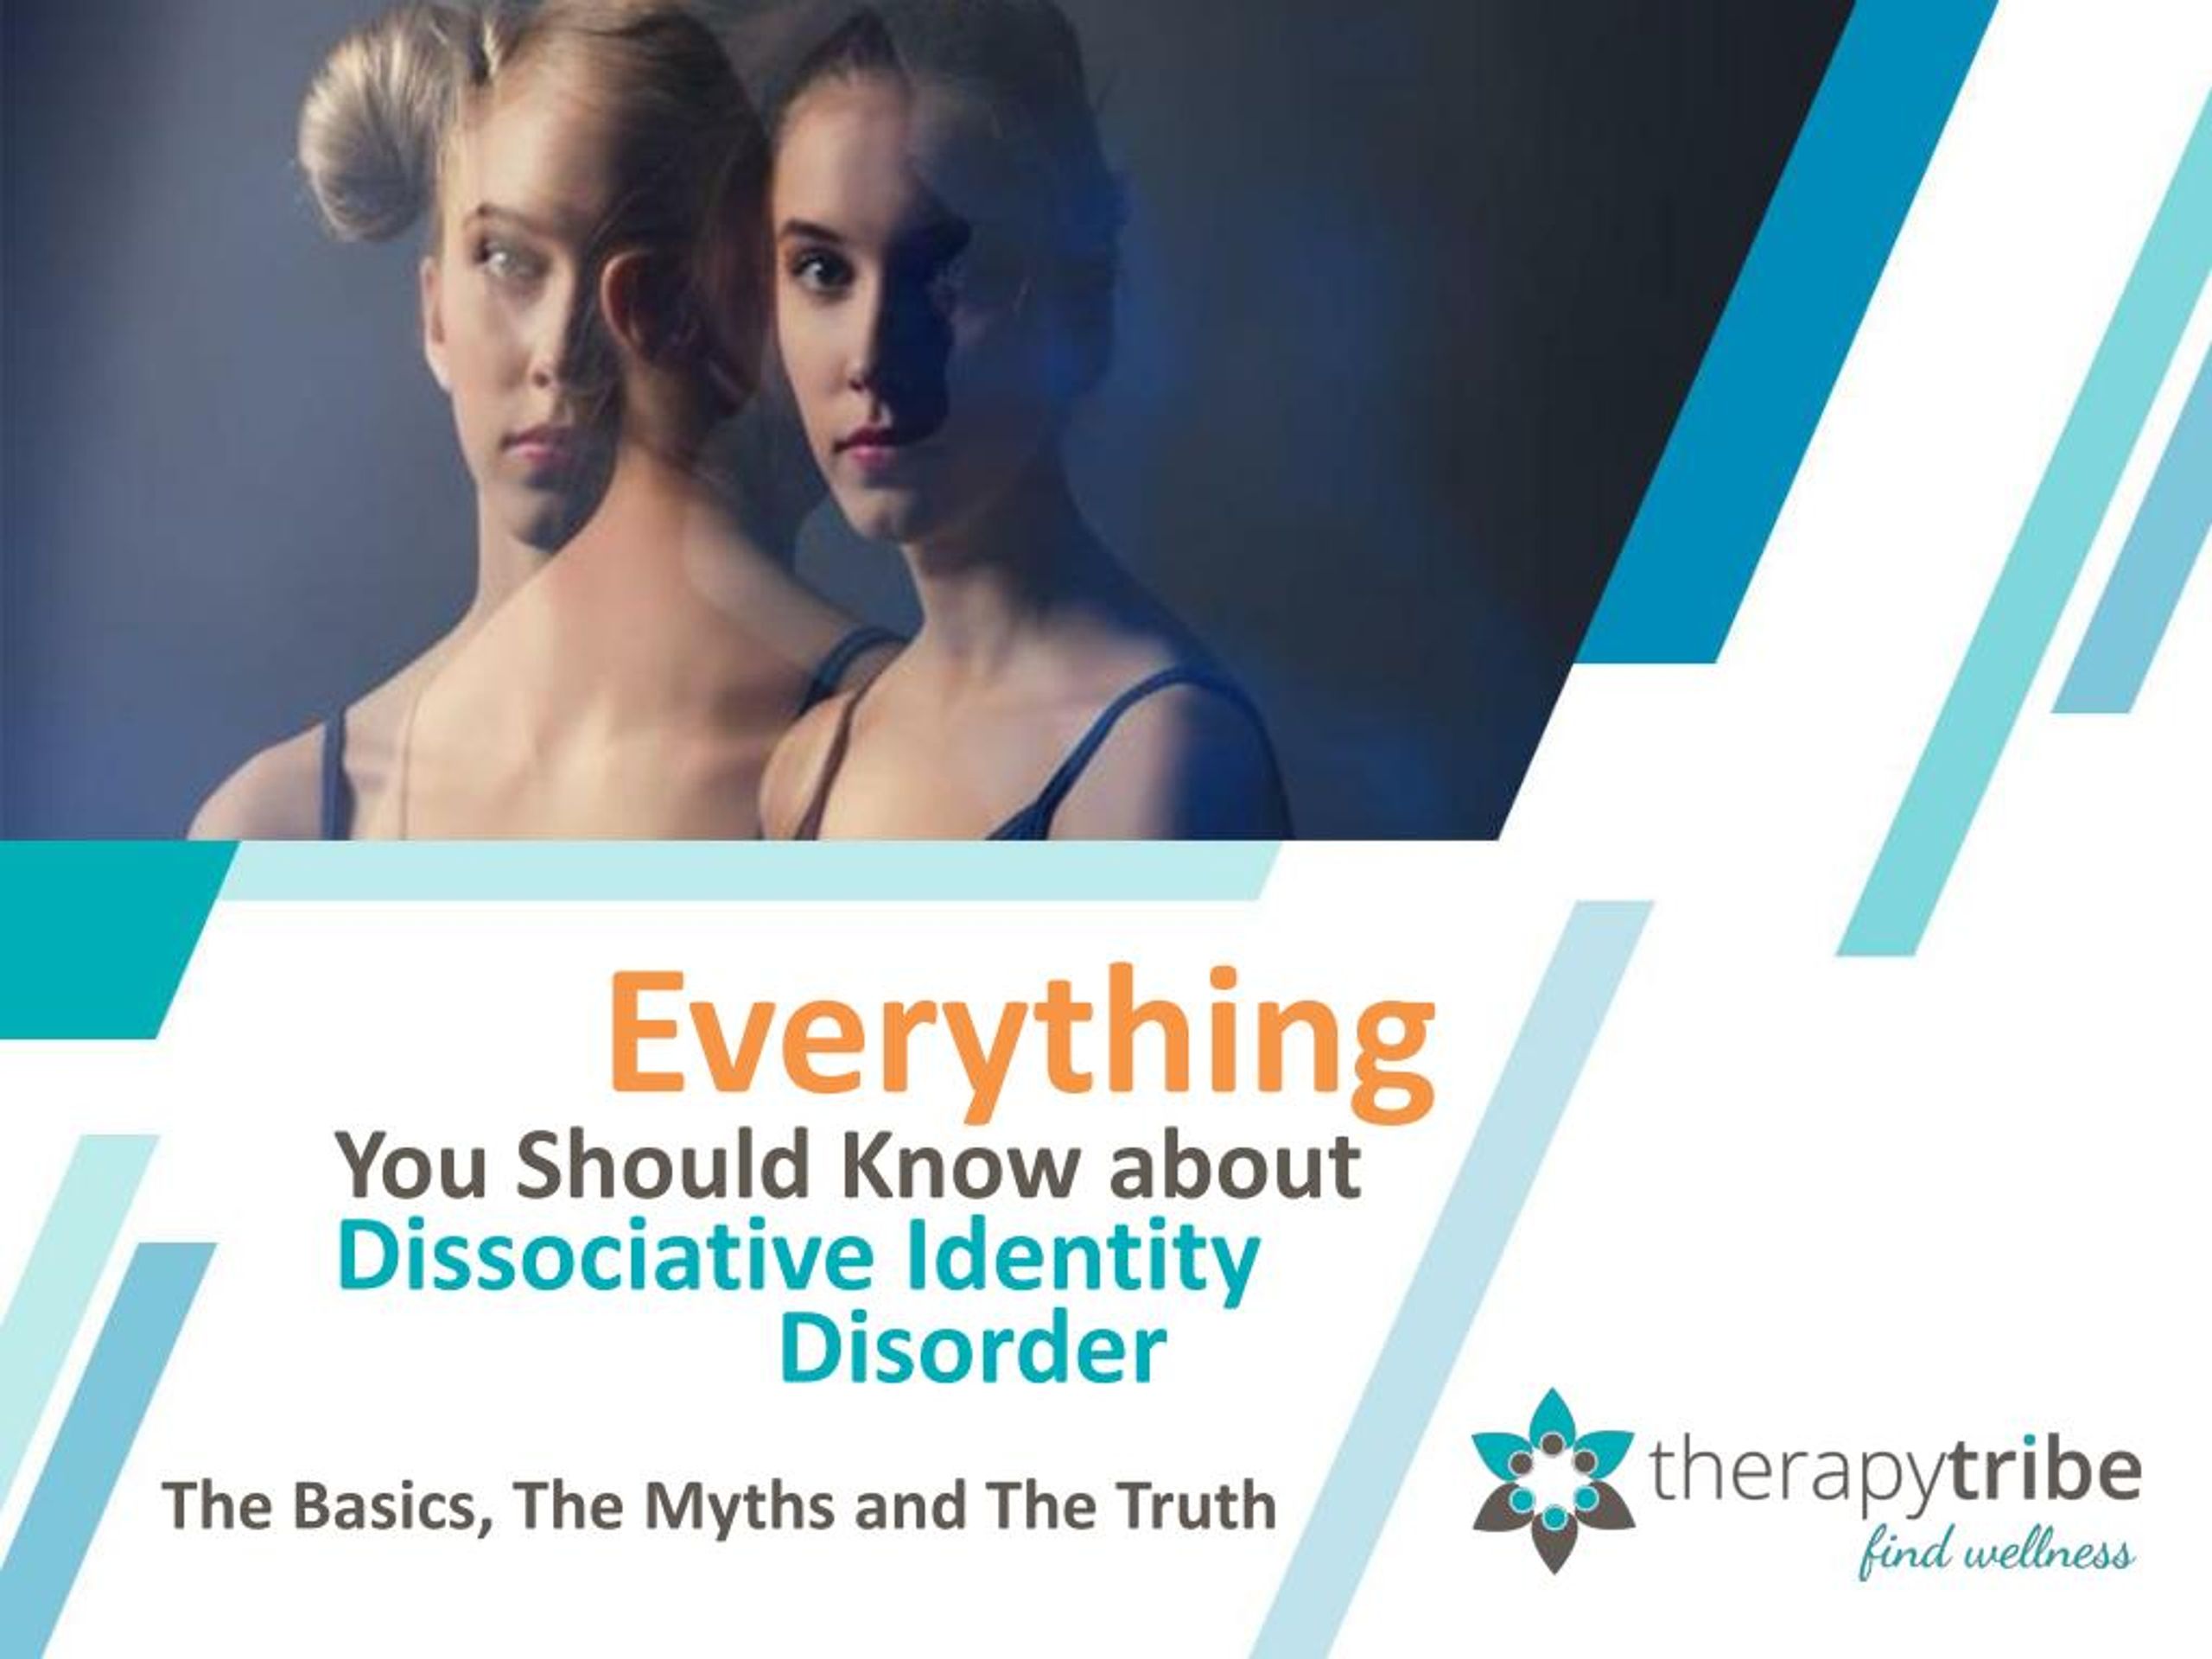 PPT Everything You Should Know about Dissociative Identity Disorder